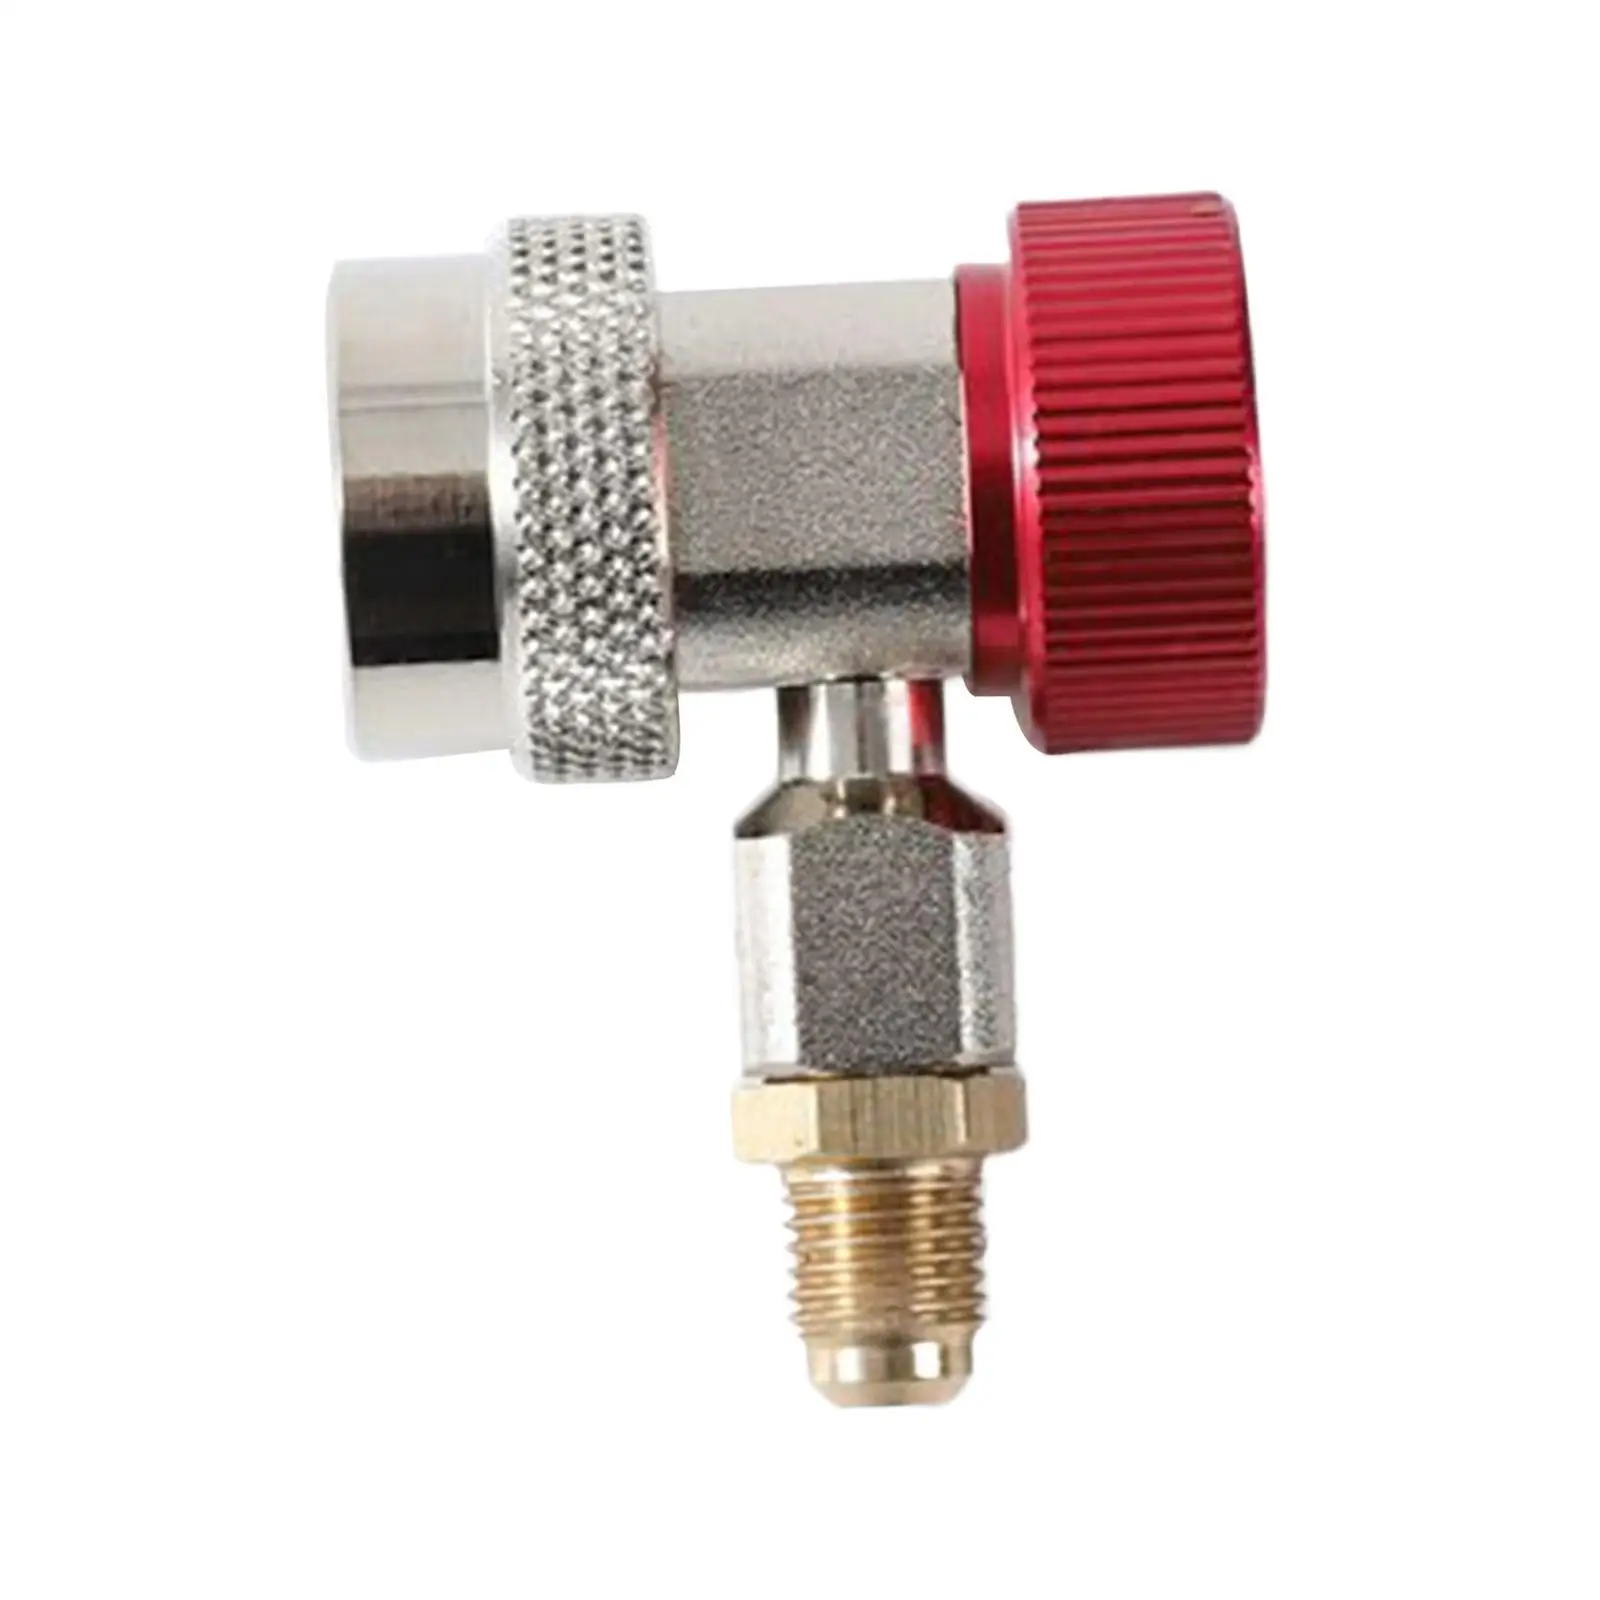 Car Quick Coupler, Easy to Install, Portable, Lightweight, Practical Durable